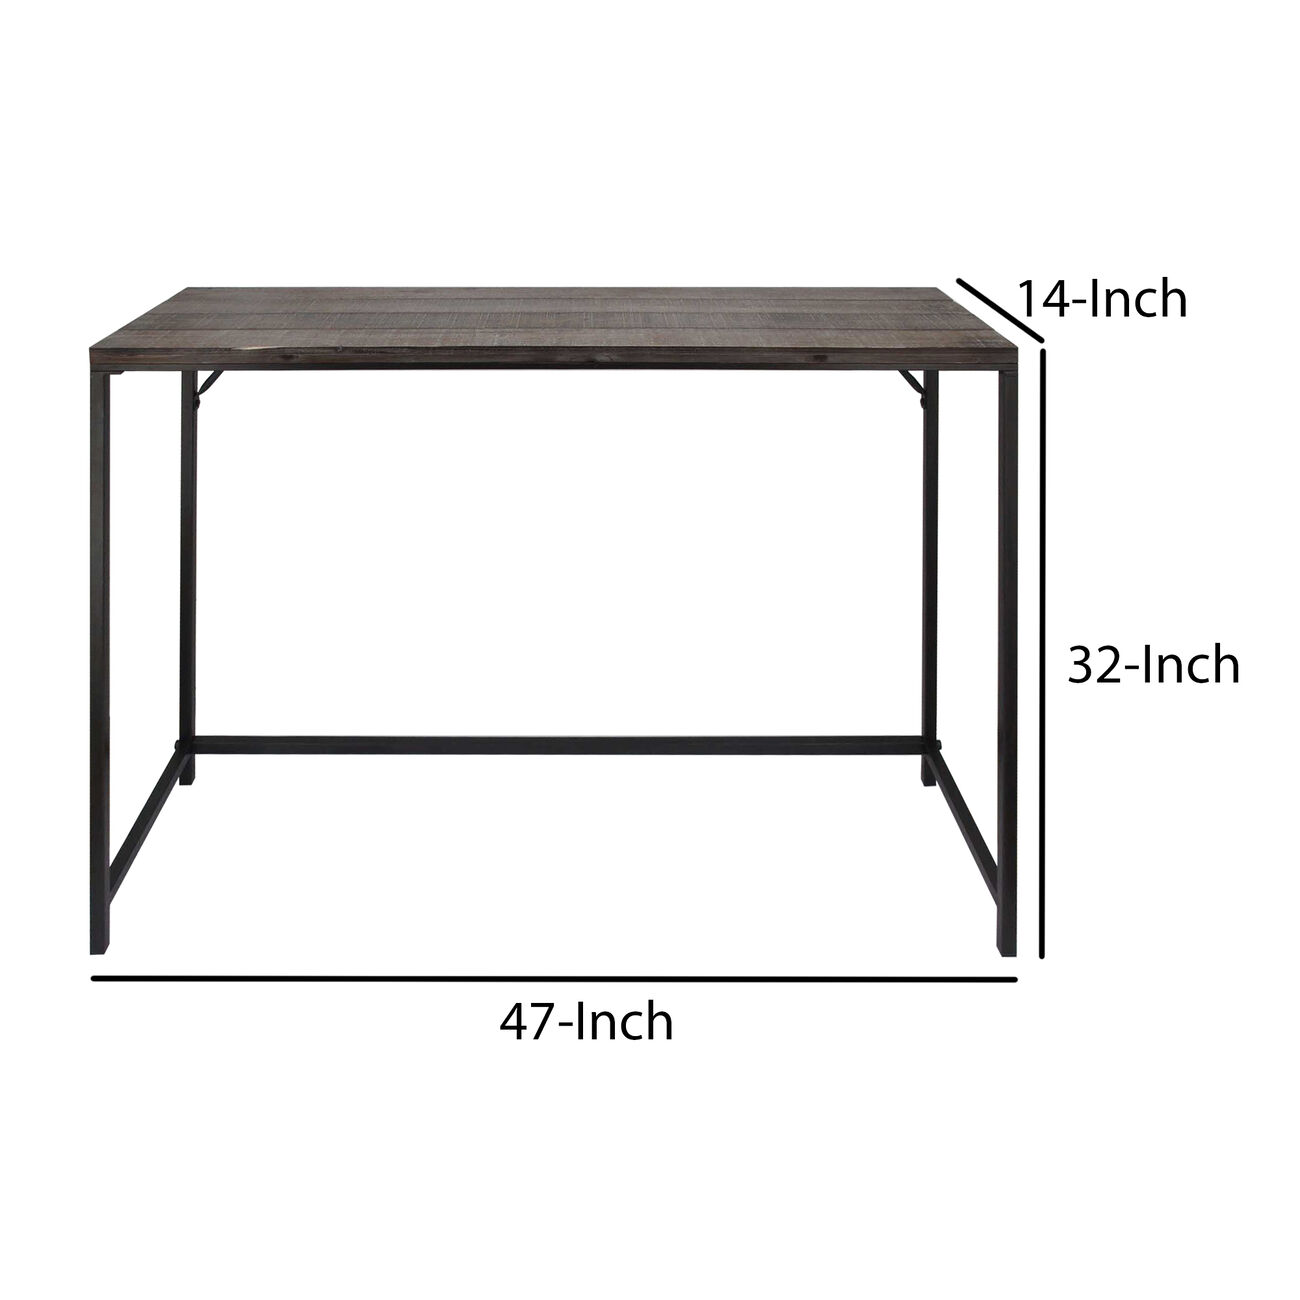 Rectangular Sofa Console Table with Plank Tabletop and Metal Base, Brown and Black